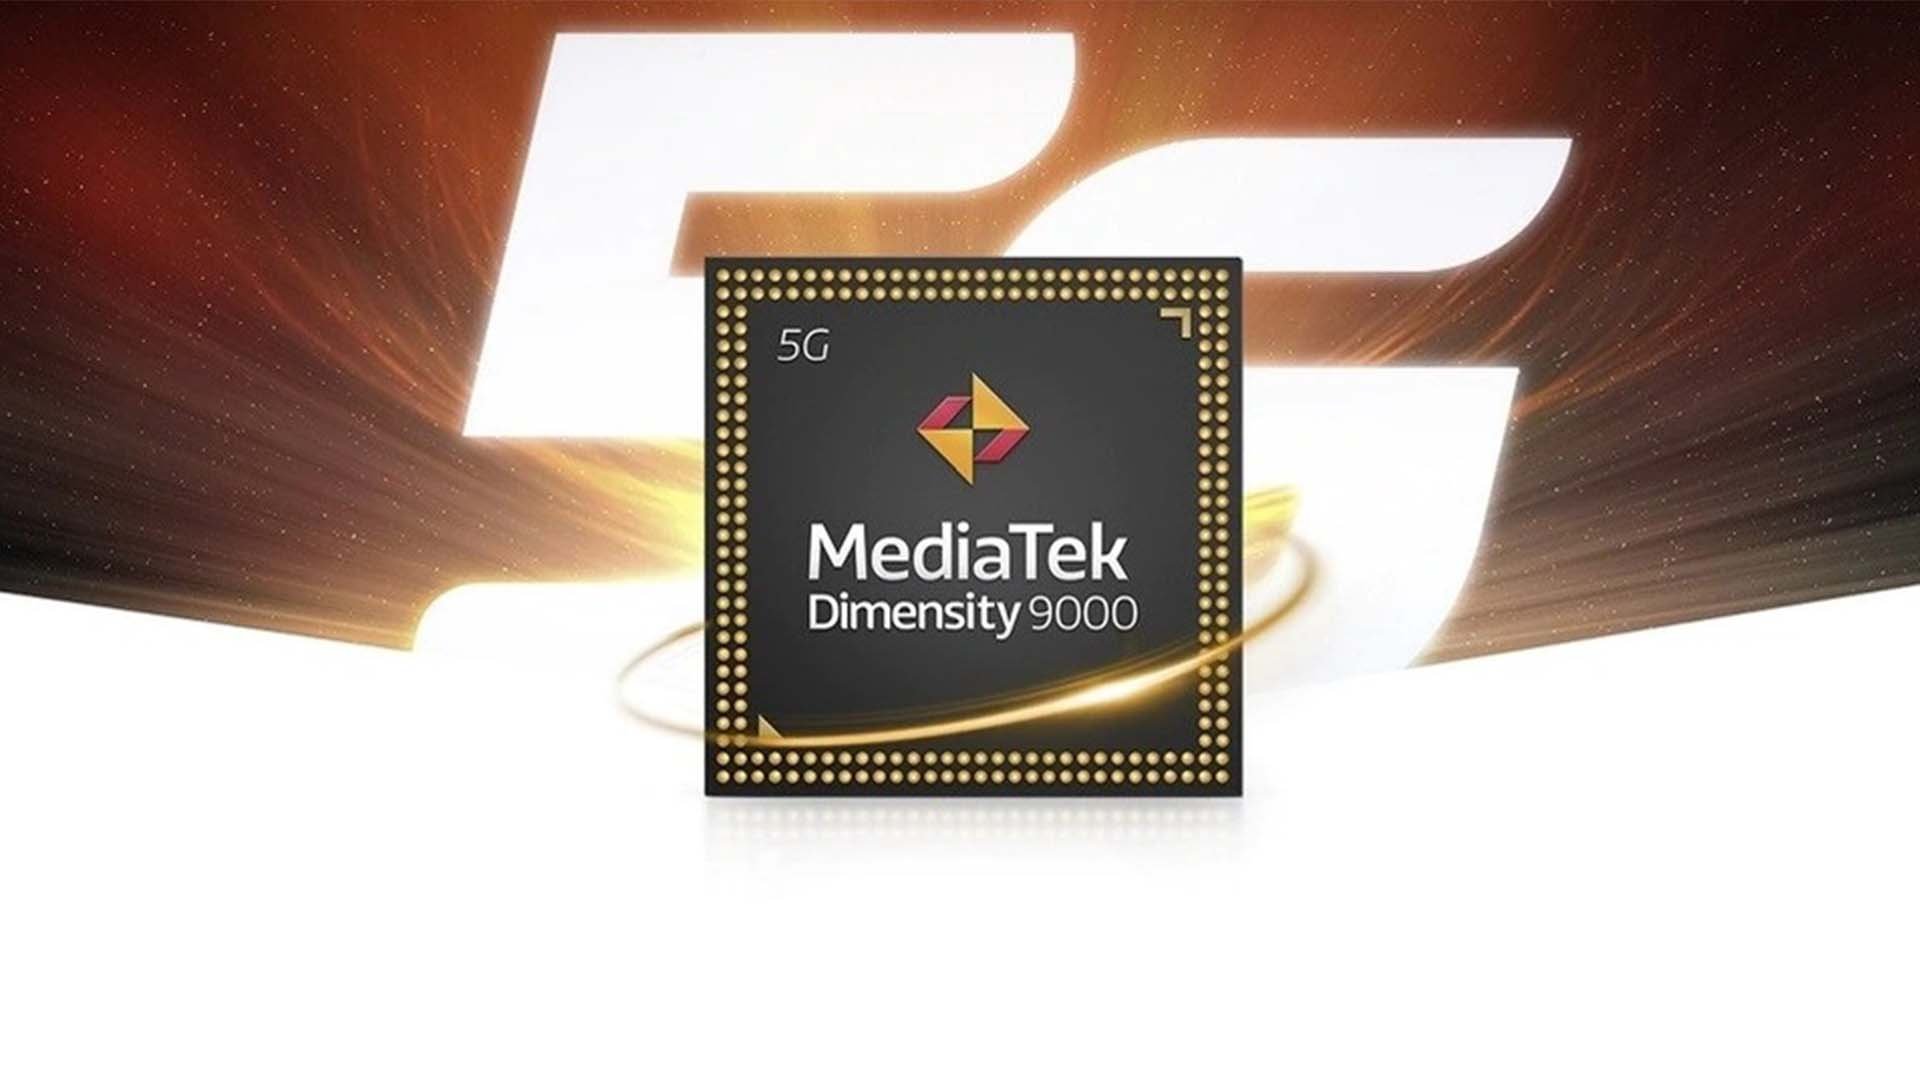 MediaTek announced an important feature of the new Dimensity 9000 processor